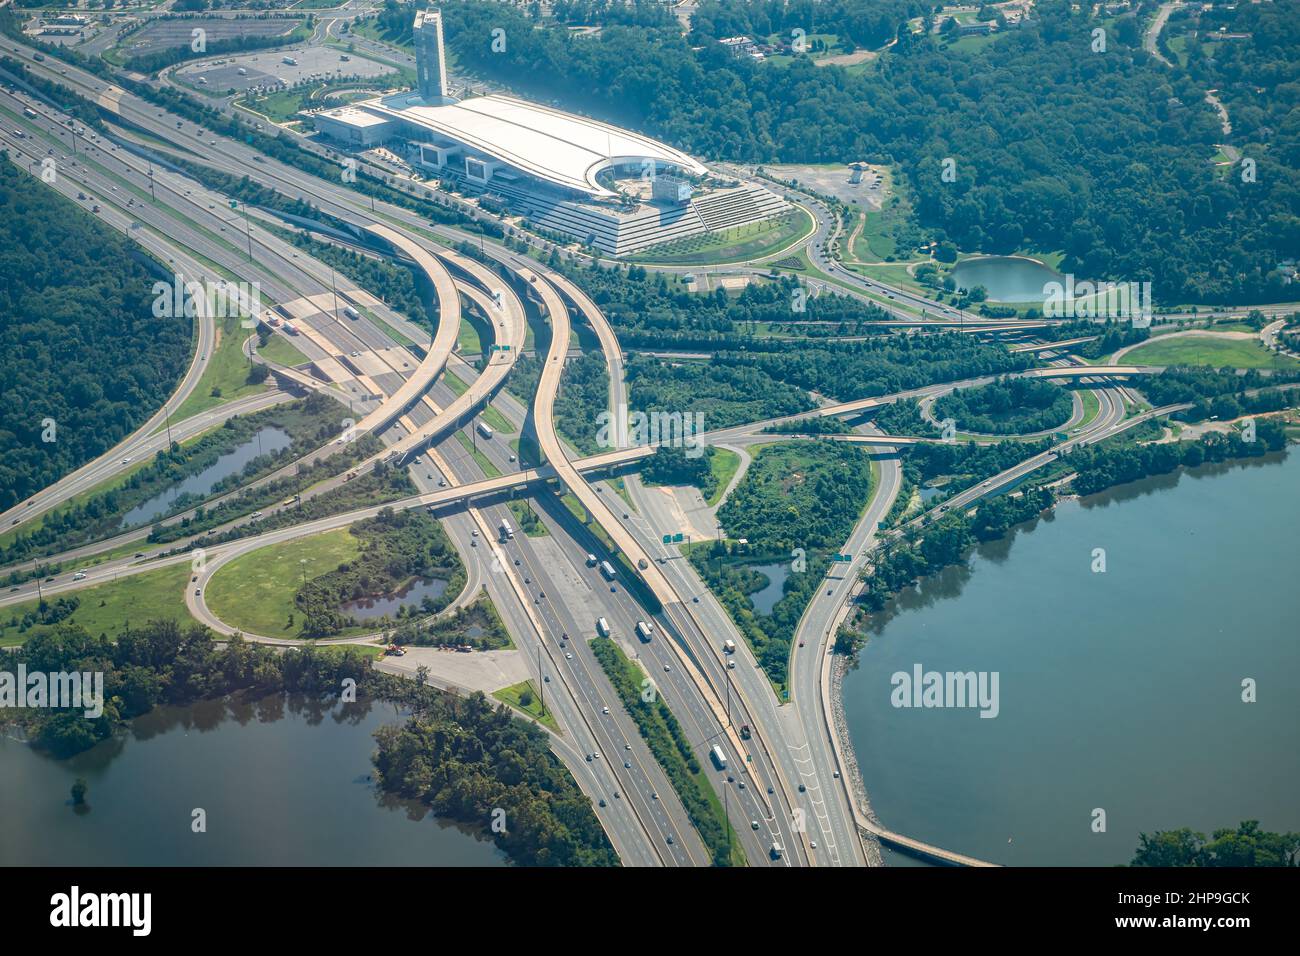 Aerial drone airplane view of cityscape near Oxon Hill in Washington DC with i495 highway capital beltway outer loop with traffic cars and buildings Stock Photo